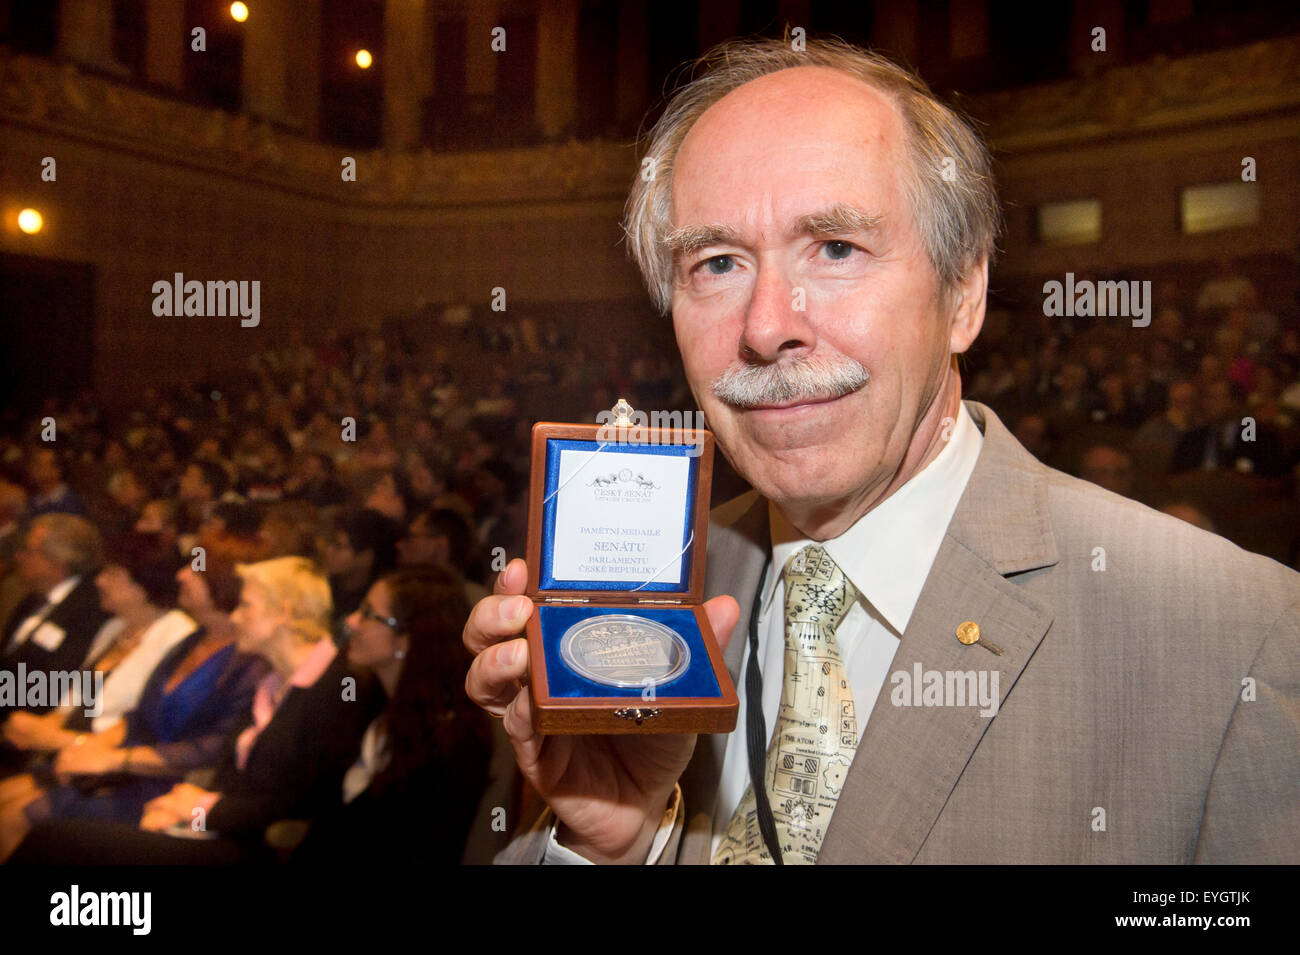 Prague, Czech Republic. 29th July, 2015. Nobel Price for Physics winner, Dutch Gerard't Hooft poses for photo with his Senate commemorative medal during the international conference Frontiers of Quantum and Mesoscopic Thermodynamics in Prague, Czech Republic, July 29, 2015. © Vit Simanek/CTK Photo/Alamy Live News Stock Photo